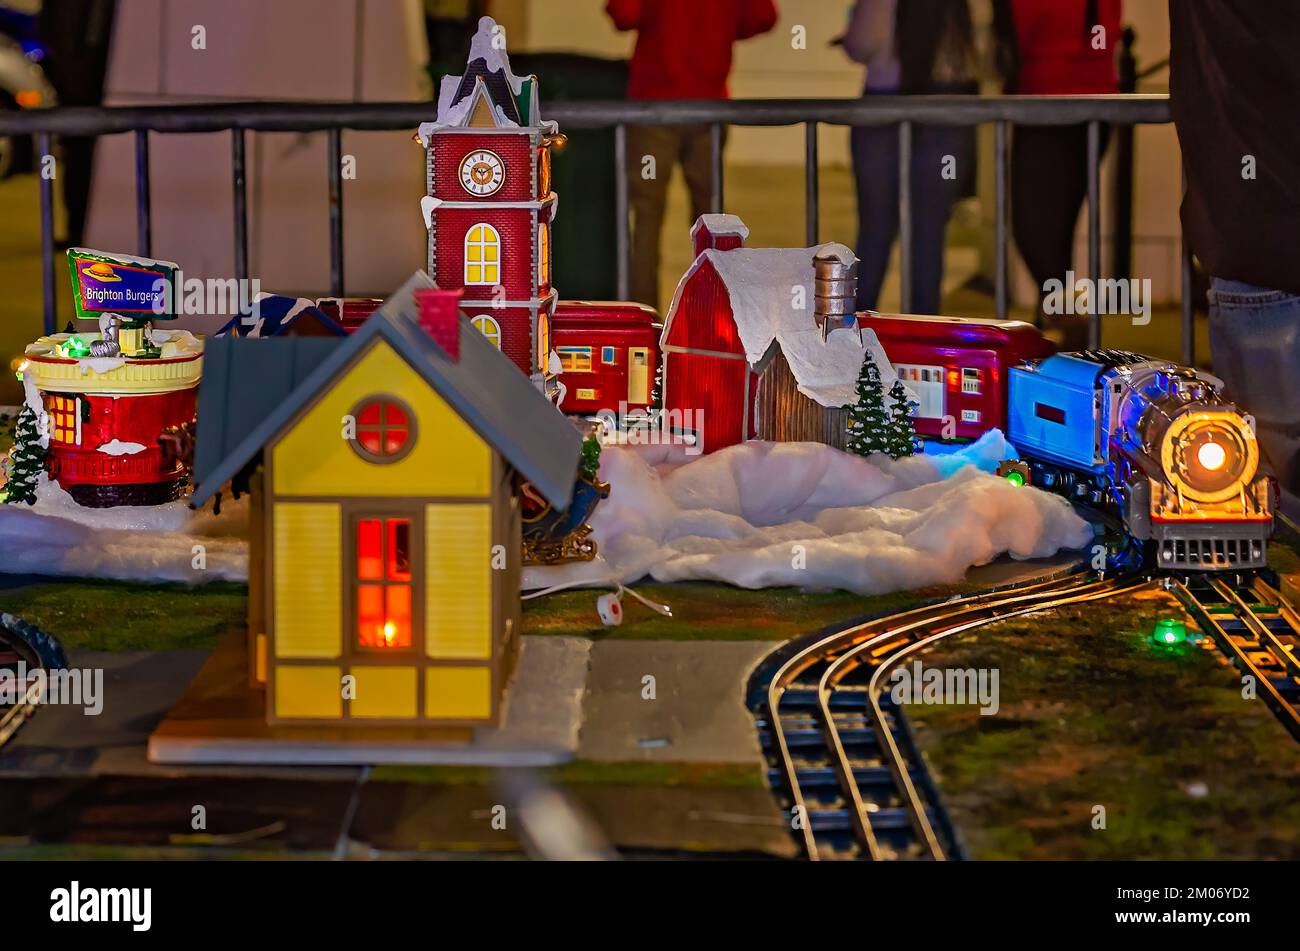 A Lionel train circles a Christmas village, Nov. 18, 2022, in Mobile, Alabama. The village was part of a model train display. Stock Photo